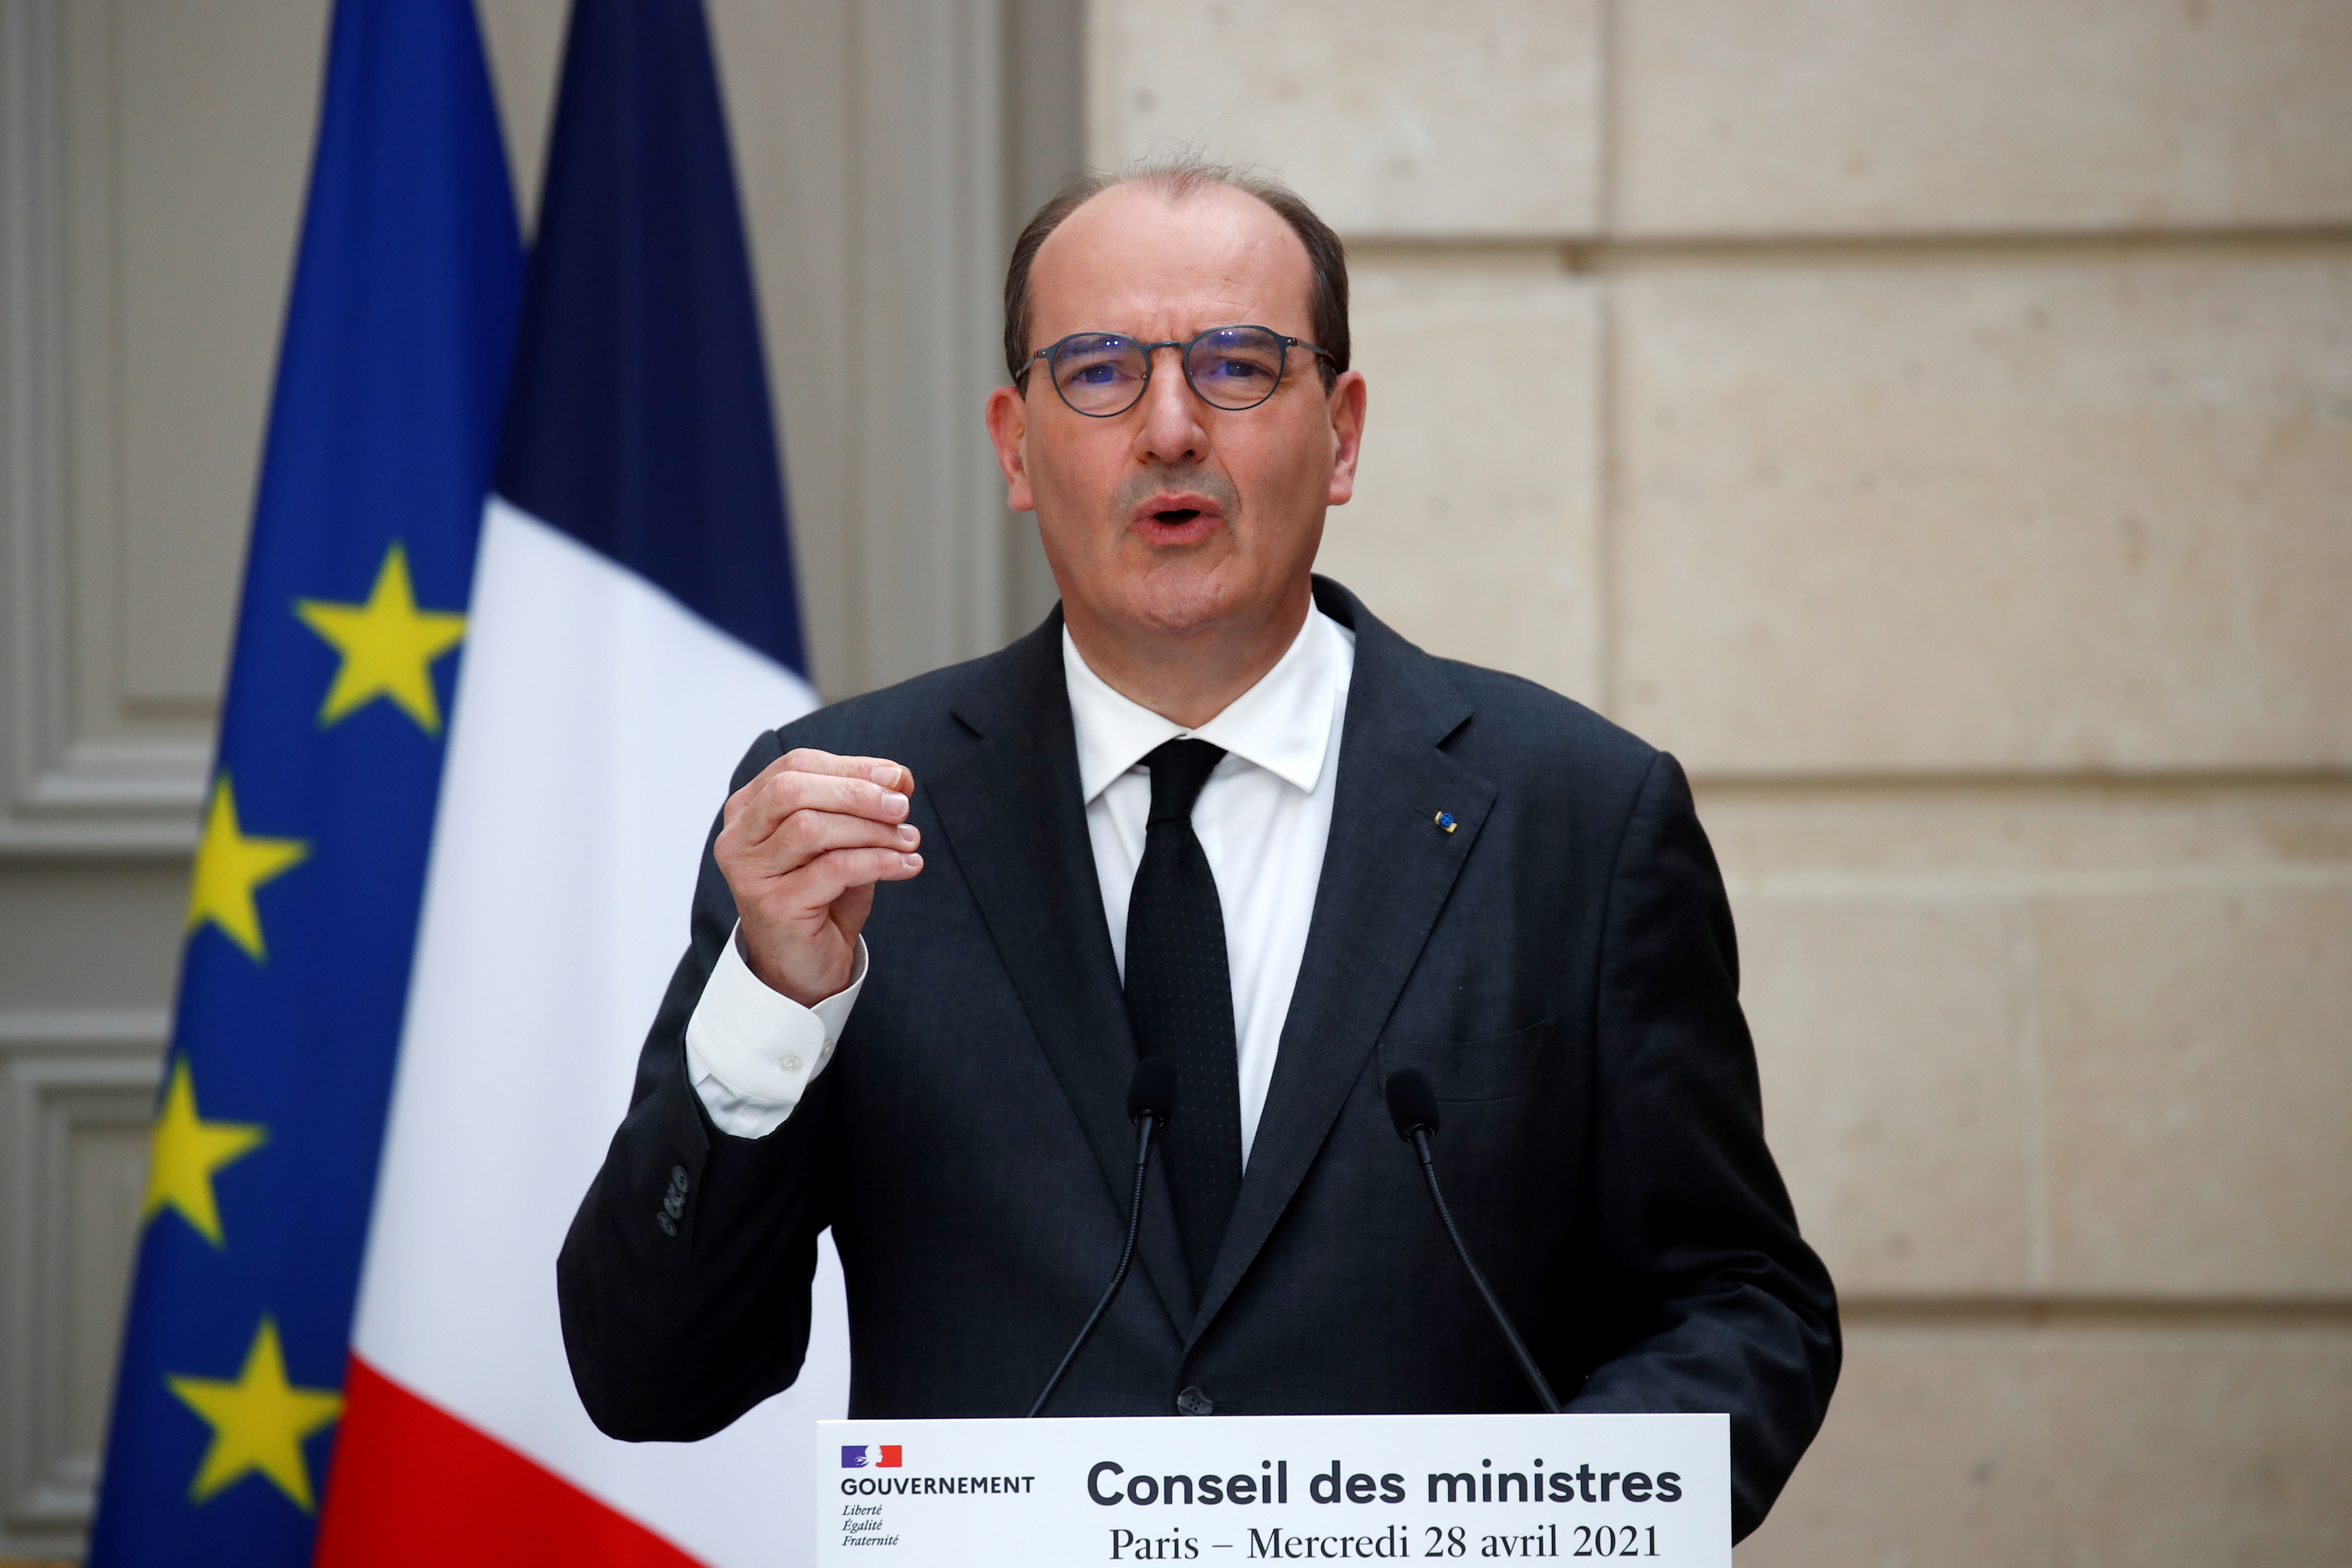 French Prime Minister Jean Castex attends a news conference on fight against terrorism at the Elysee Palace in Paris